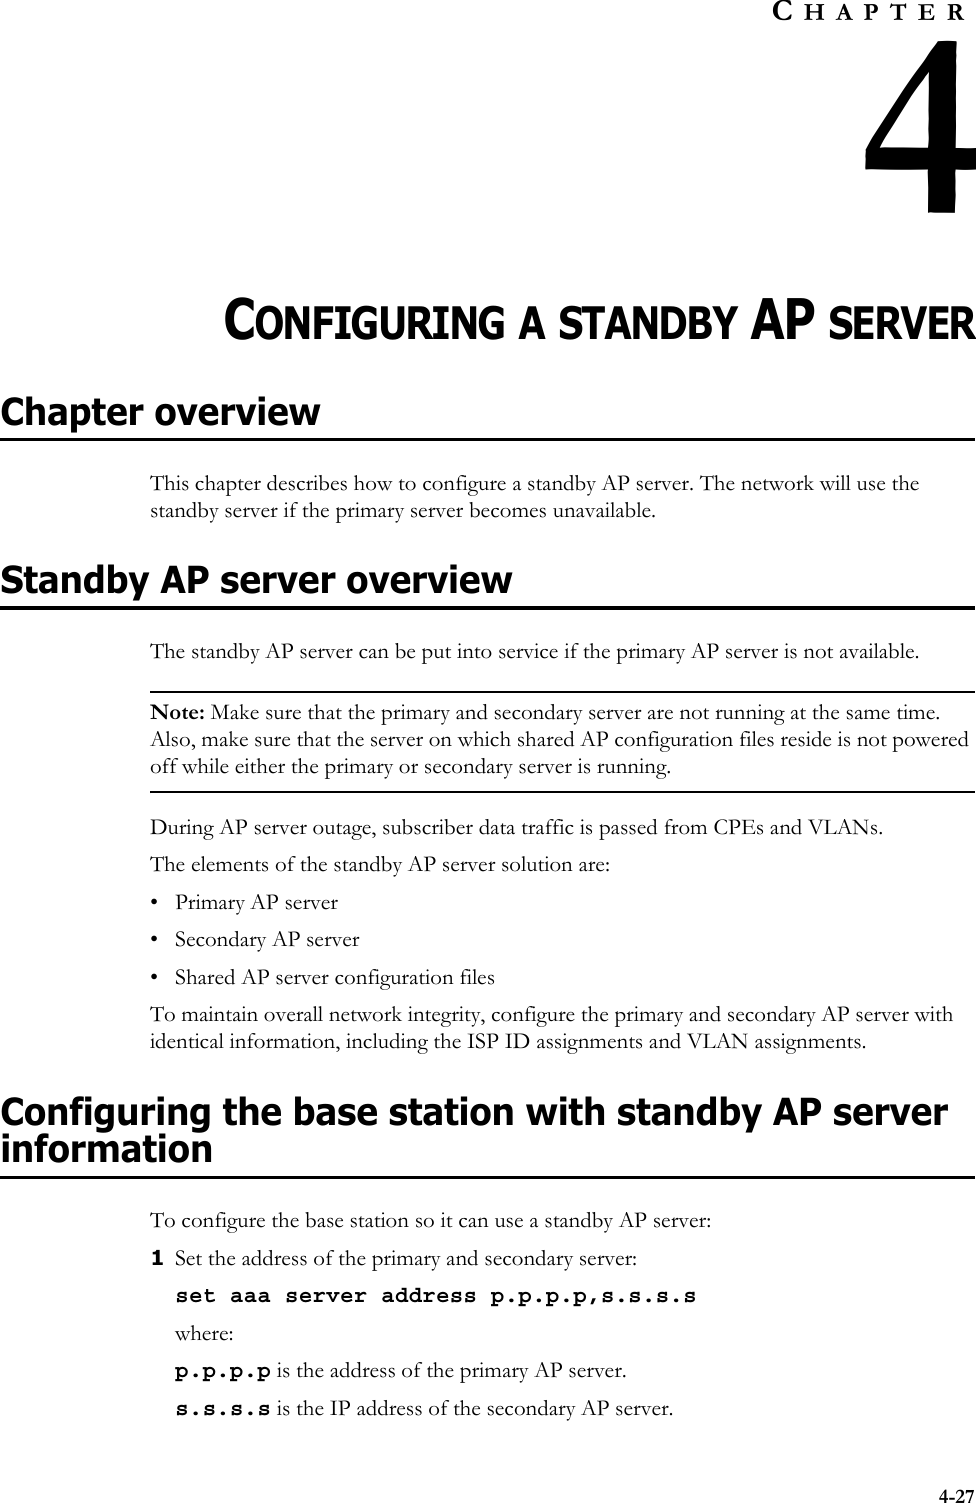 4-27CHAPTER4CHAPTER 4CONFIGURING A STANDBY AP SERVERChapter overviewThis chapter describes how to configure a standby AP server. The network will use the standby server if the primary server becomes unavailable. Standby AP server overviewThe standby AP server can be put into service if the primary AP server is not available.Note: Make sure that the primary and secondary server are not running at the same time. Also, make sure that the server on which shared AP configuration files reside is not powered off while either the primary or secondary server is running. During AP server outage, subscriber data traffic is passed from CPEs and VLANs. The elements of the standby AP server solution are: • Primary AP server• Secondary AP server• Shared AP server configuration filesTo maintain overall network integrity, configure the primary and secondary AP server with identical information, including the ISP ID assignments and VLAN assignments. Configuring the base station with standby AP server informationTo configure the base station so it can use a standby AP server:1Set the address of the primary and secondary server:set aaa server address p.p.p.p,s.s.s.swhere:p.p.p.p is the address of the primary AP server. s.s.s.s is the IP address of the secondary AP server. 